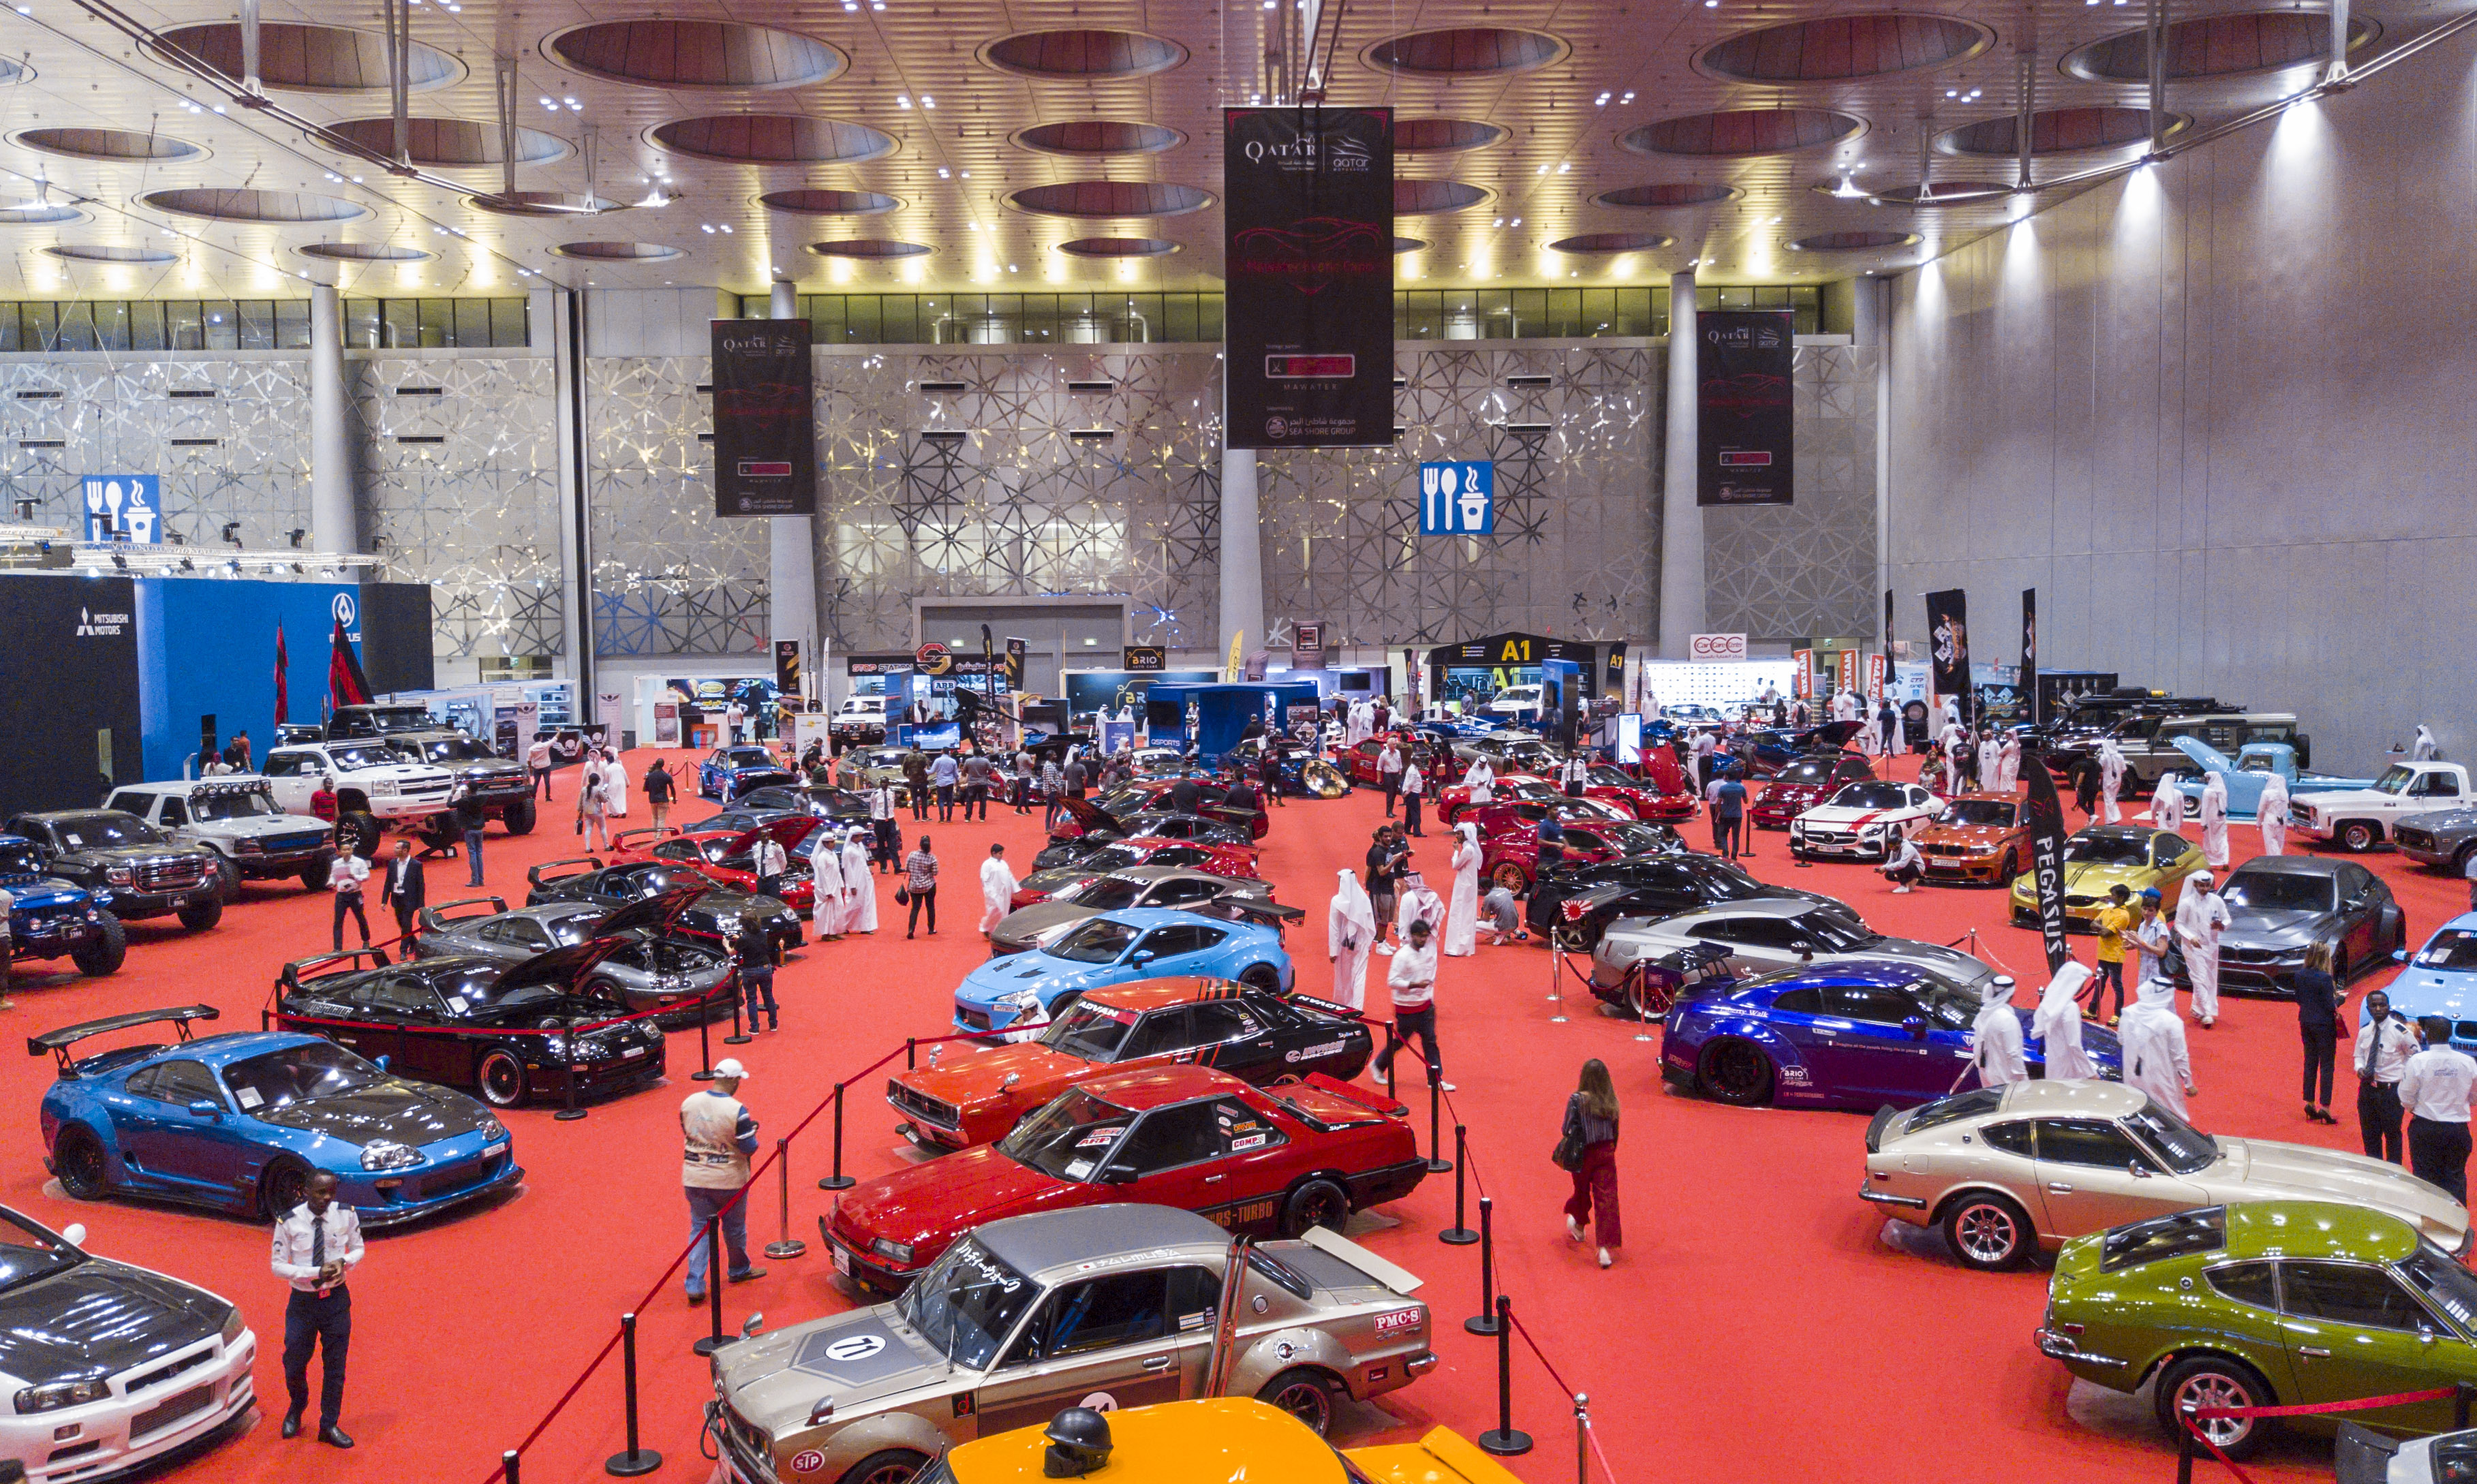 Mawater’s Classic & Modified cars Enrich QMS Visitors’ Experience